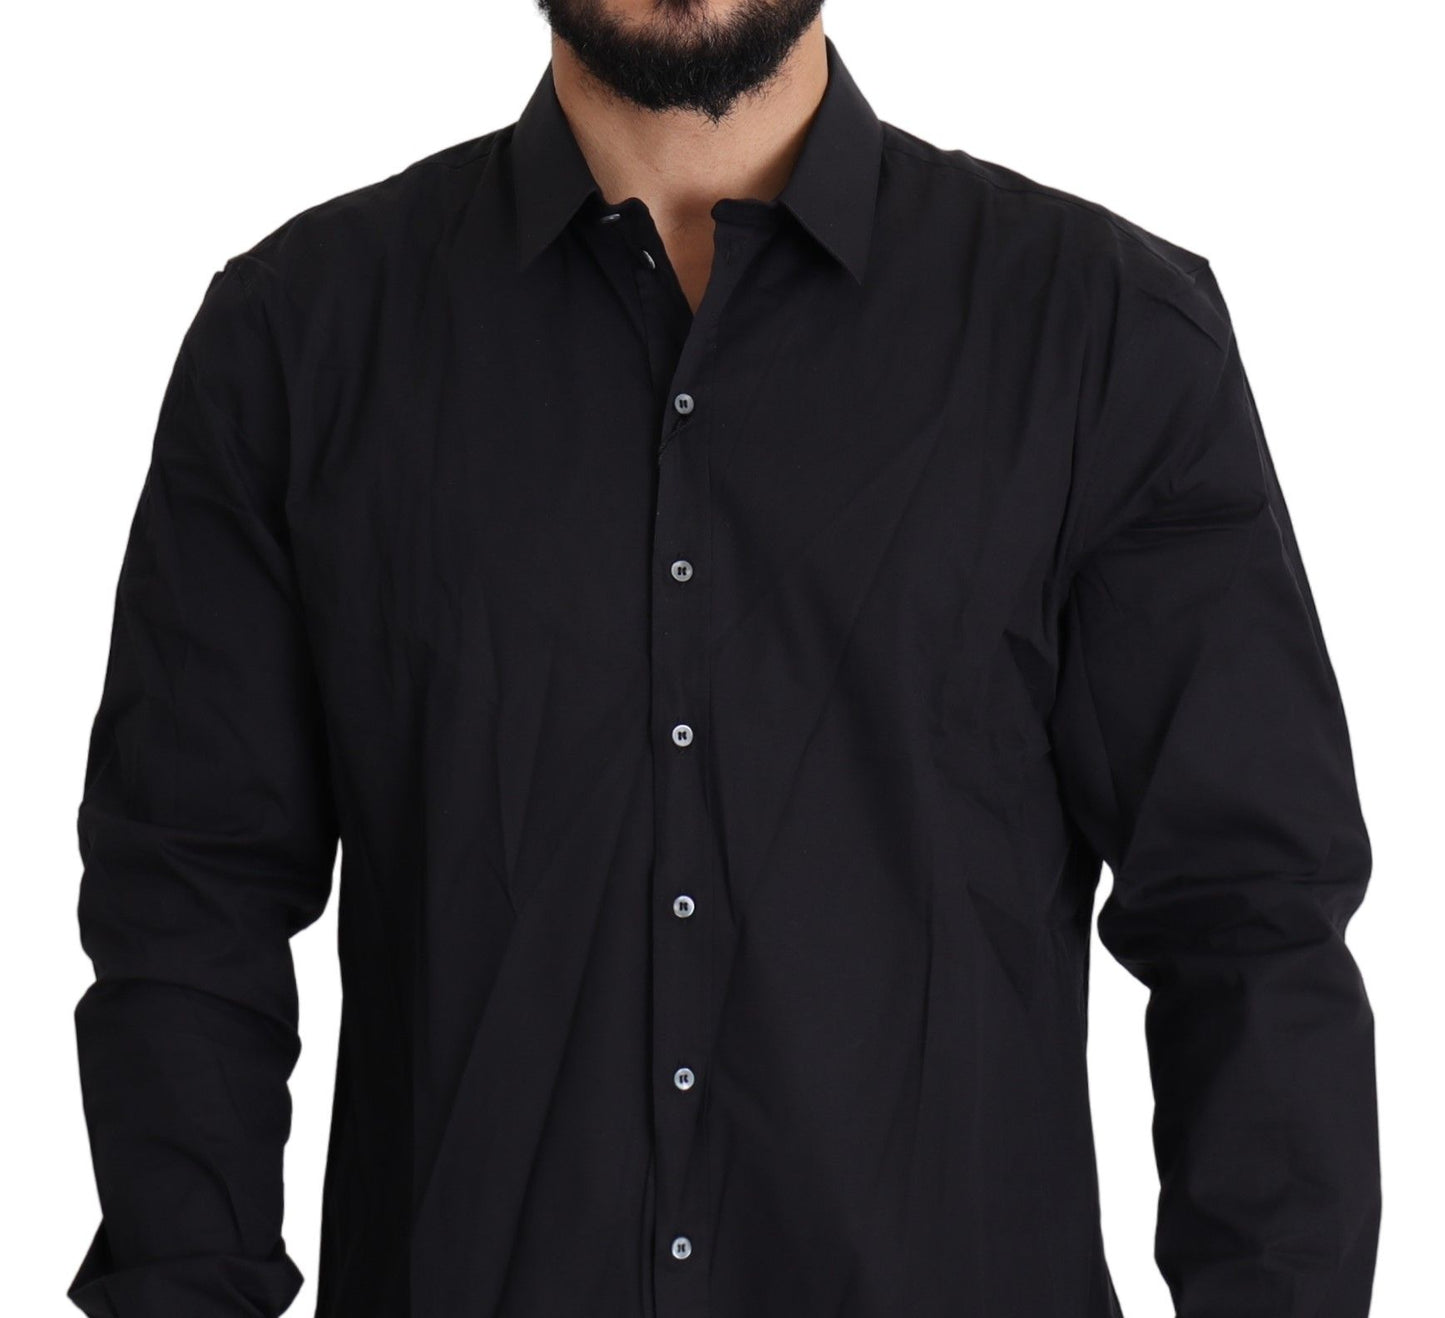 Black Cotton Stretch Dress SICILIA Shirt - Designed by Dolce & Gabbana Available to Buy at a Discounted Price on Moon Behind The Hill Online Designer Discount Store